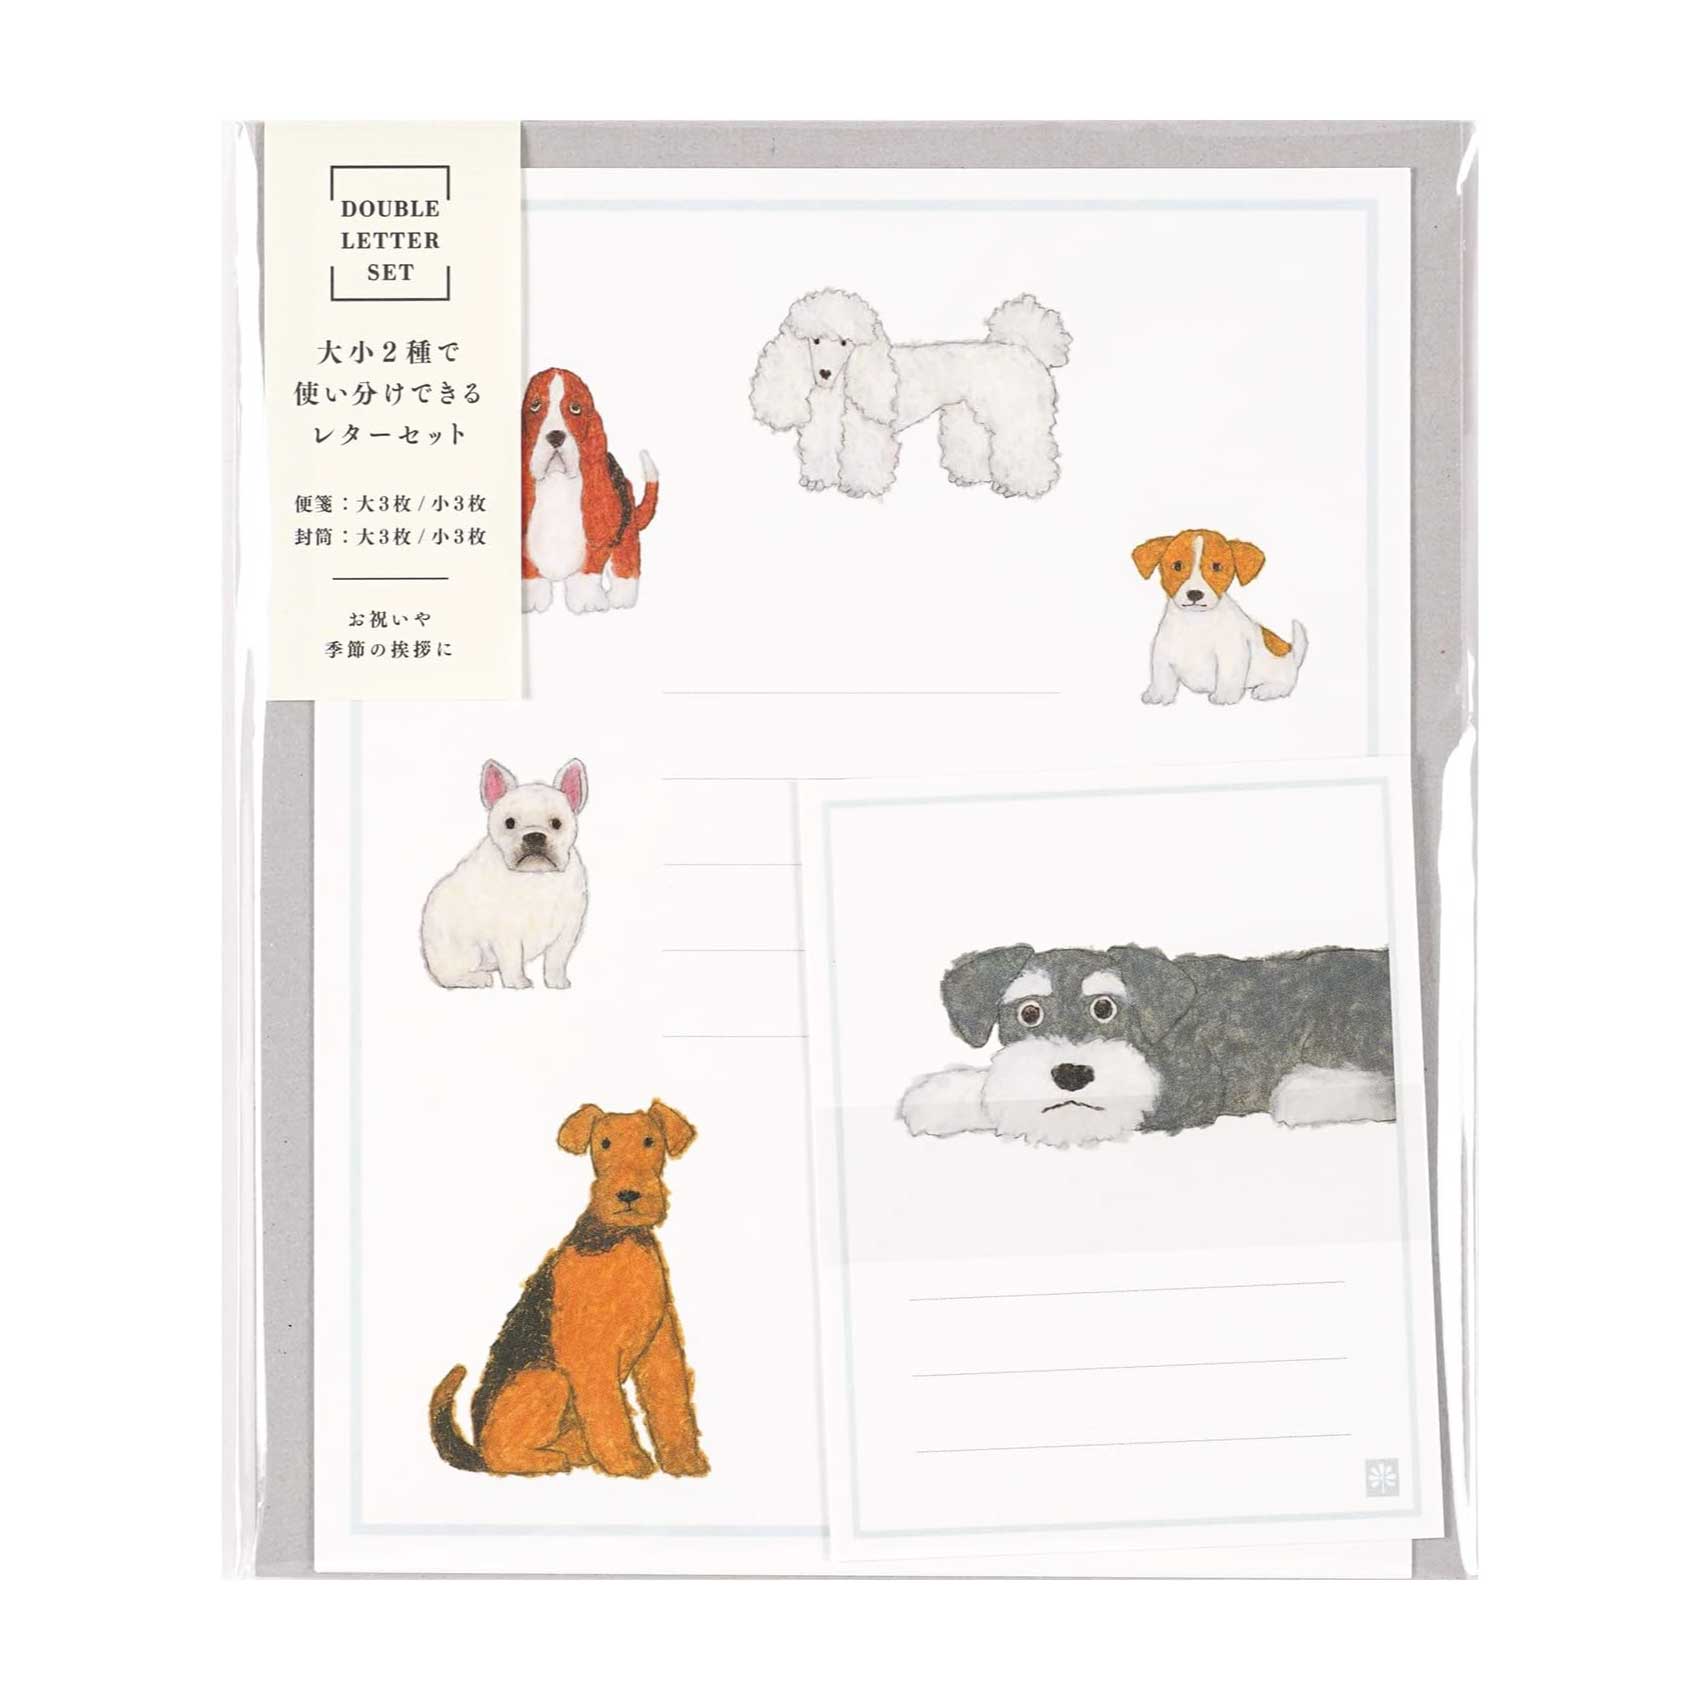 Dogs letter writing set lined paper illustrations different dog breeds stationery australia